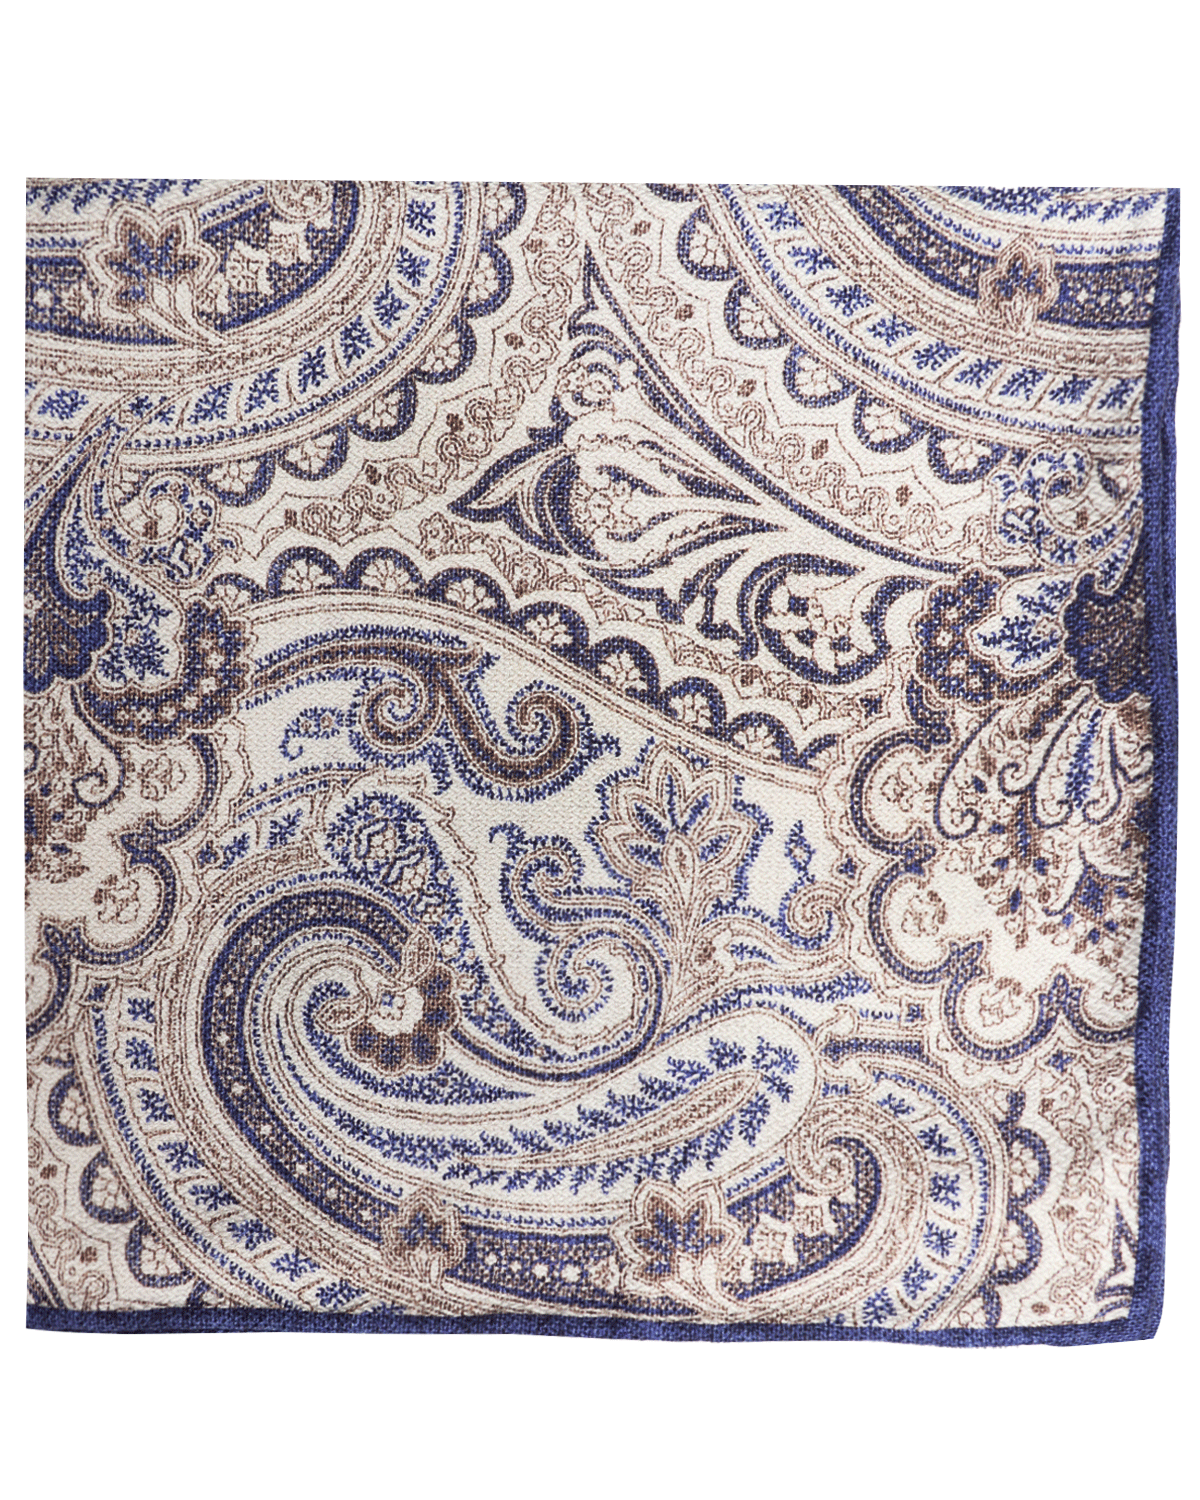 Blue and White Reversible Paisley Silk Pocket Square